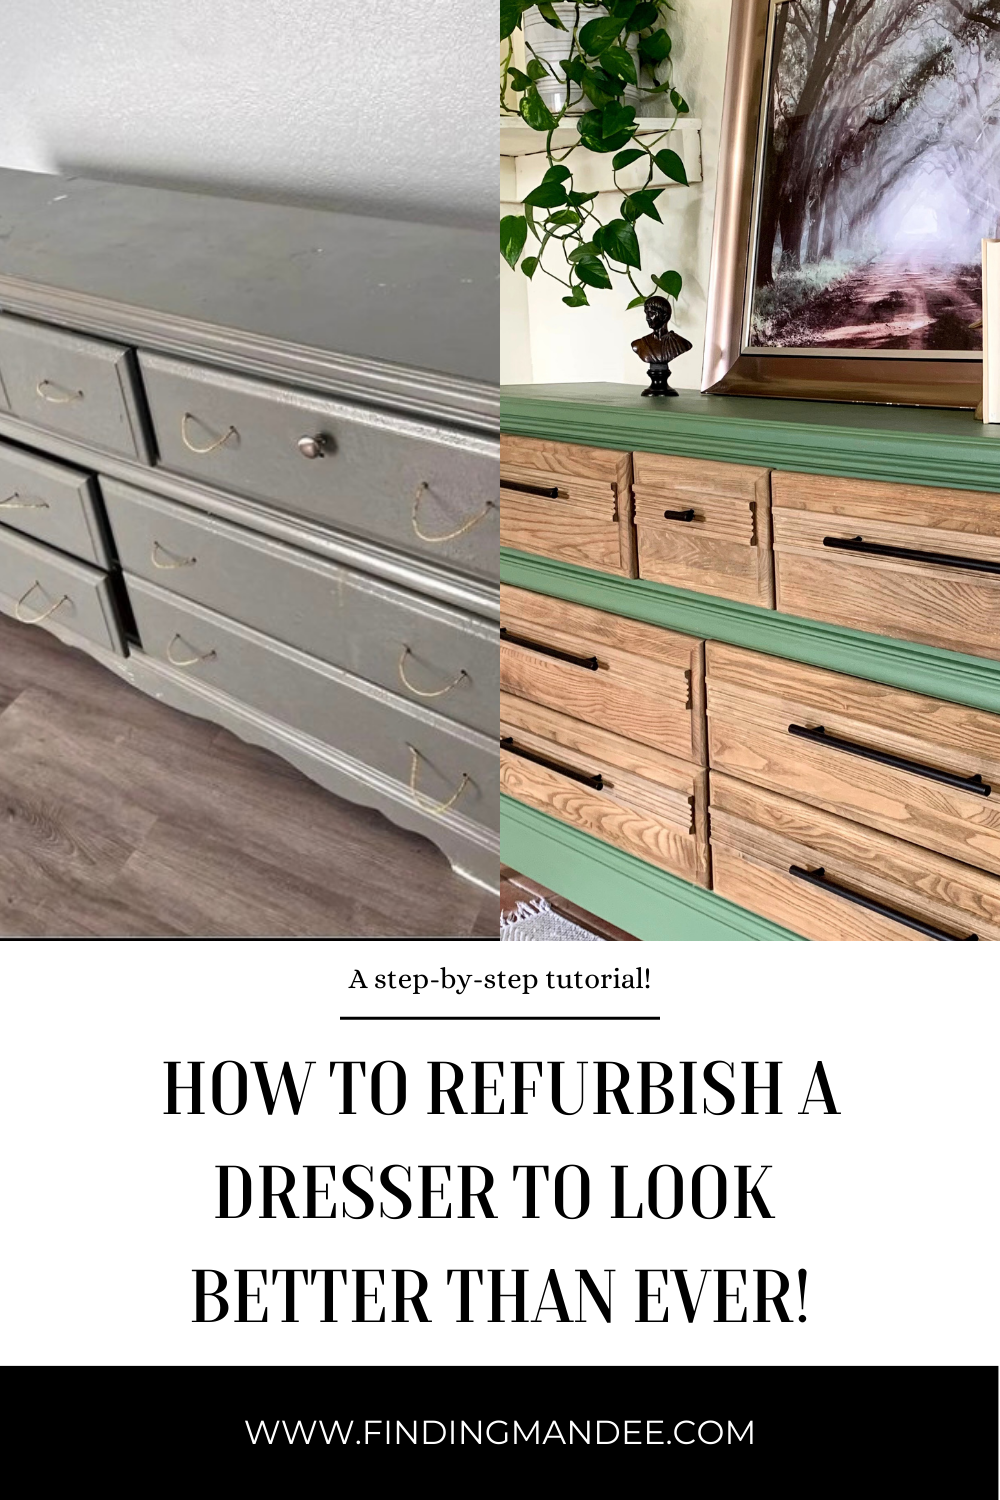 How to Refurbish a Dresser to Look Better Than Ever | Finding Mandee